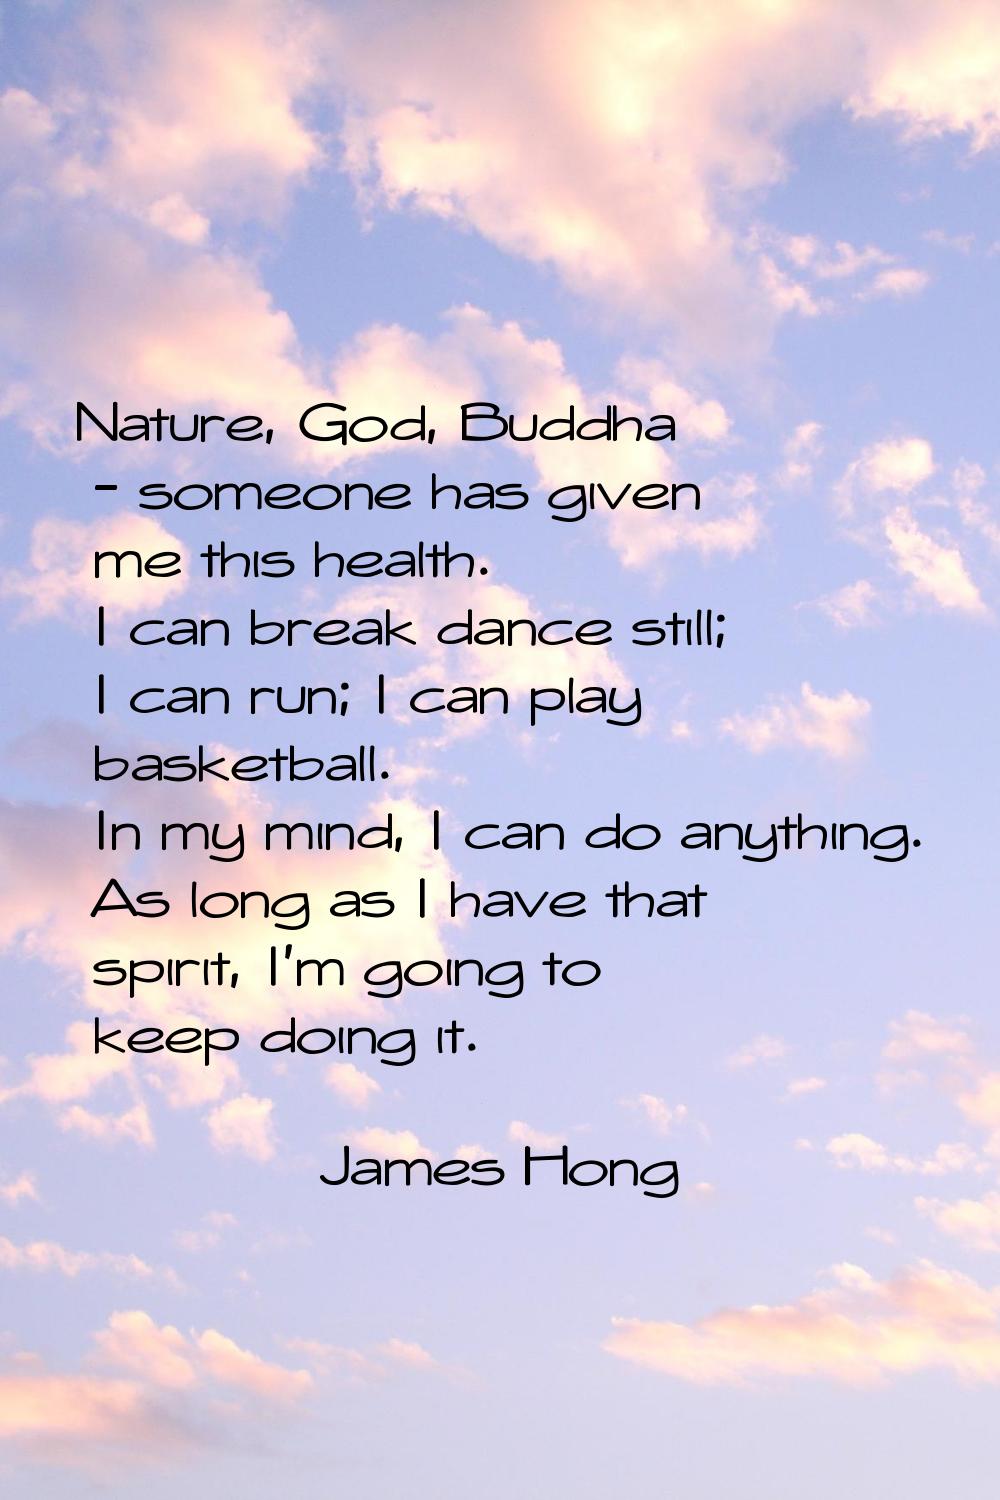 Nature, God, Buddha - someone has given me this health. I can break dance still; I can run; I can p